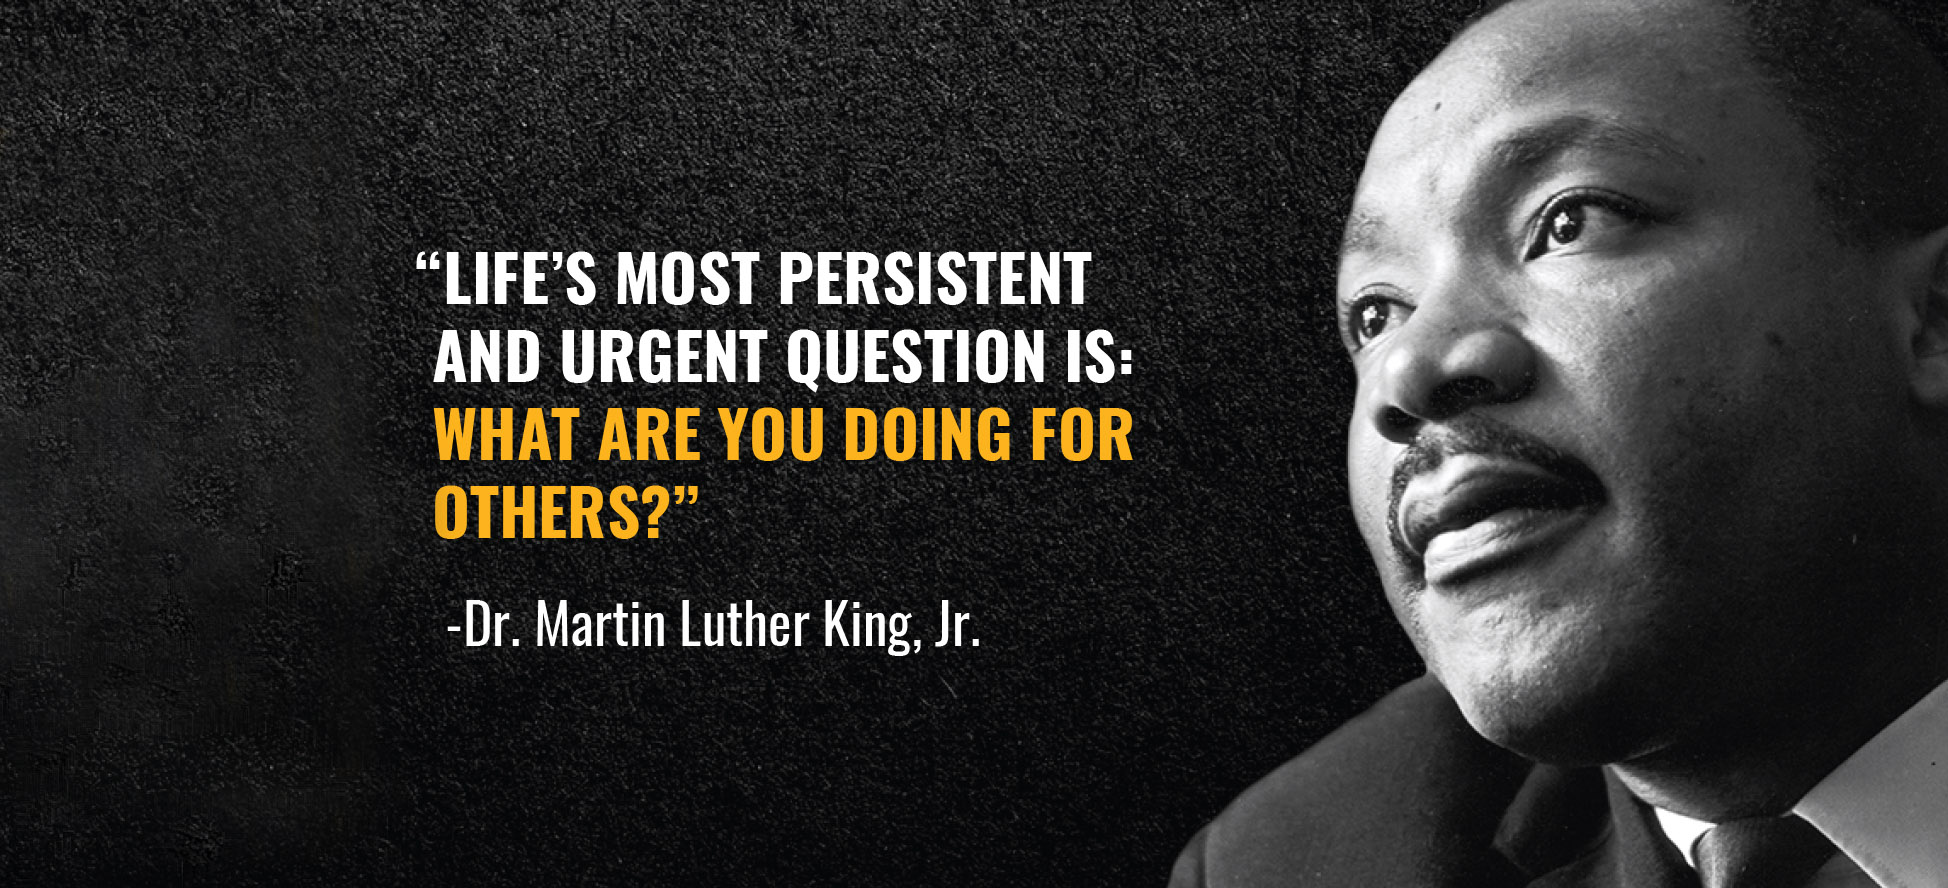 "Life's most persistent and urgent question is: What are you doing for others?" Dr. Martin Luther King Jr. 